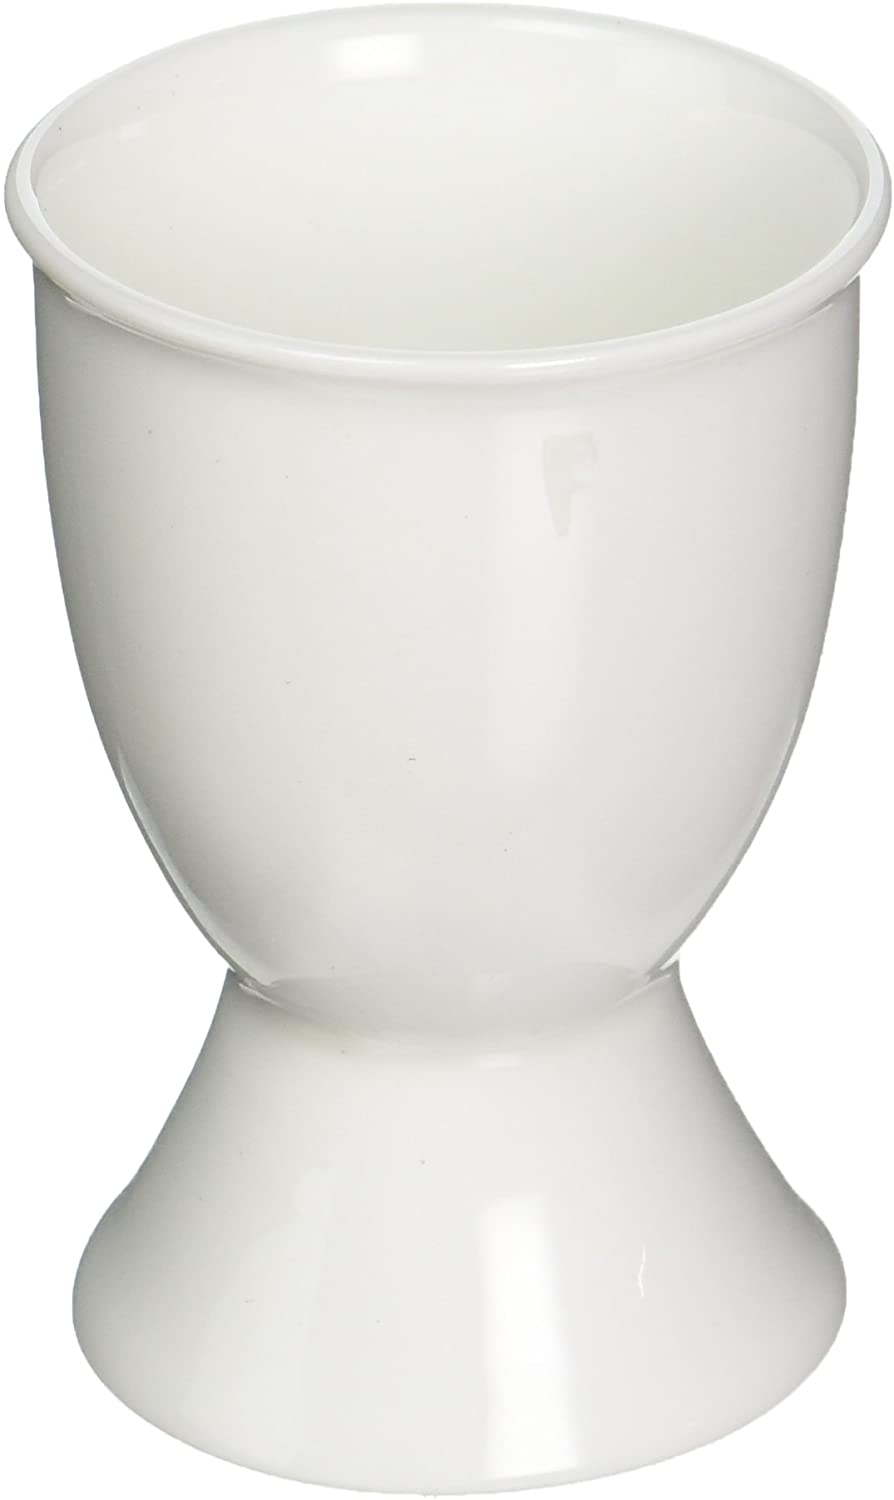 Maxwell and Williams Designer Homewares Maxwell & Williams Cashmere Bone China Egg Cup